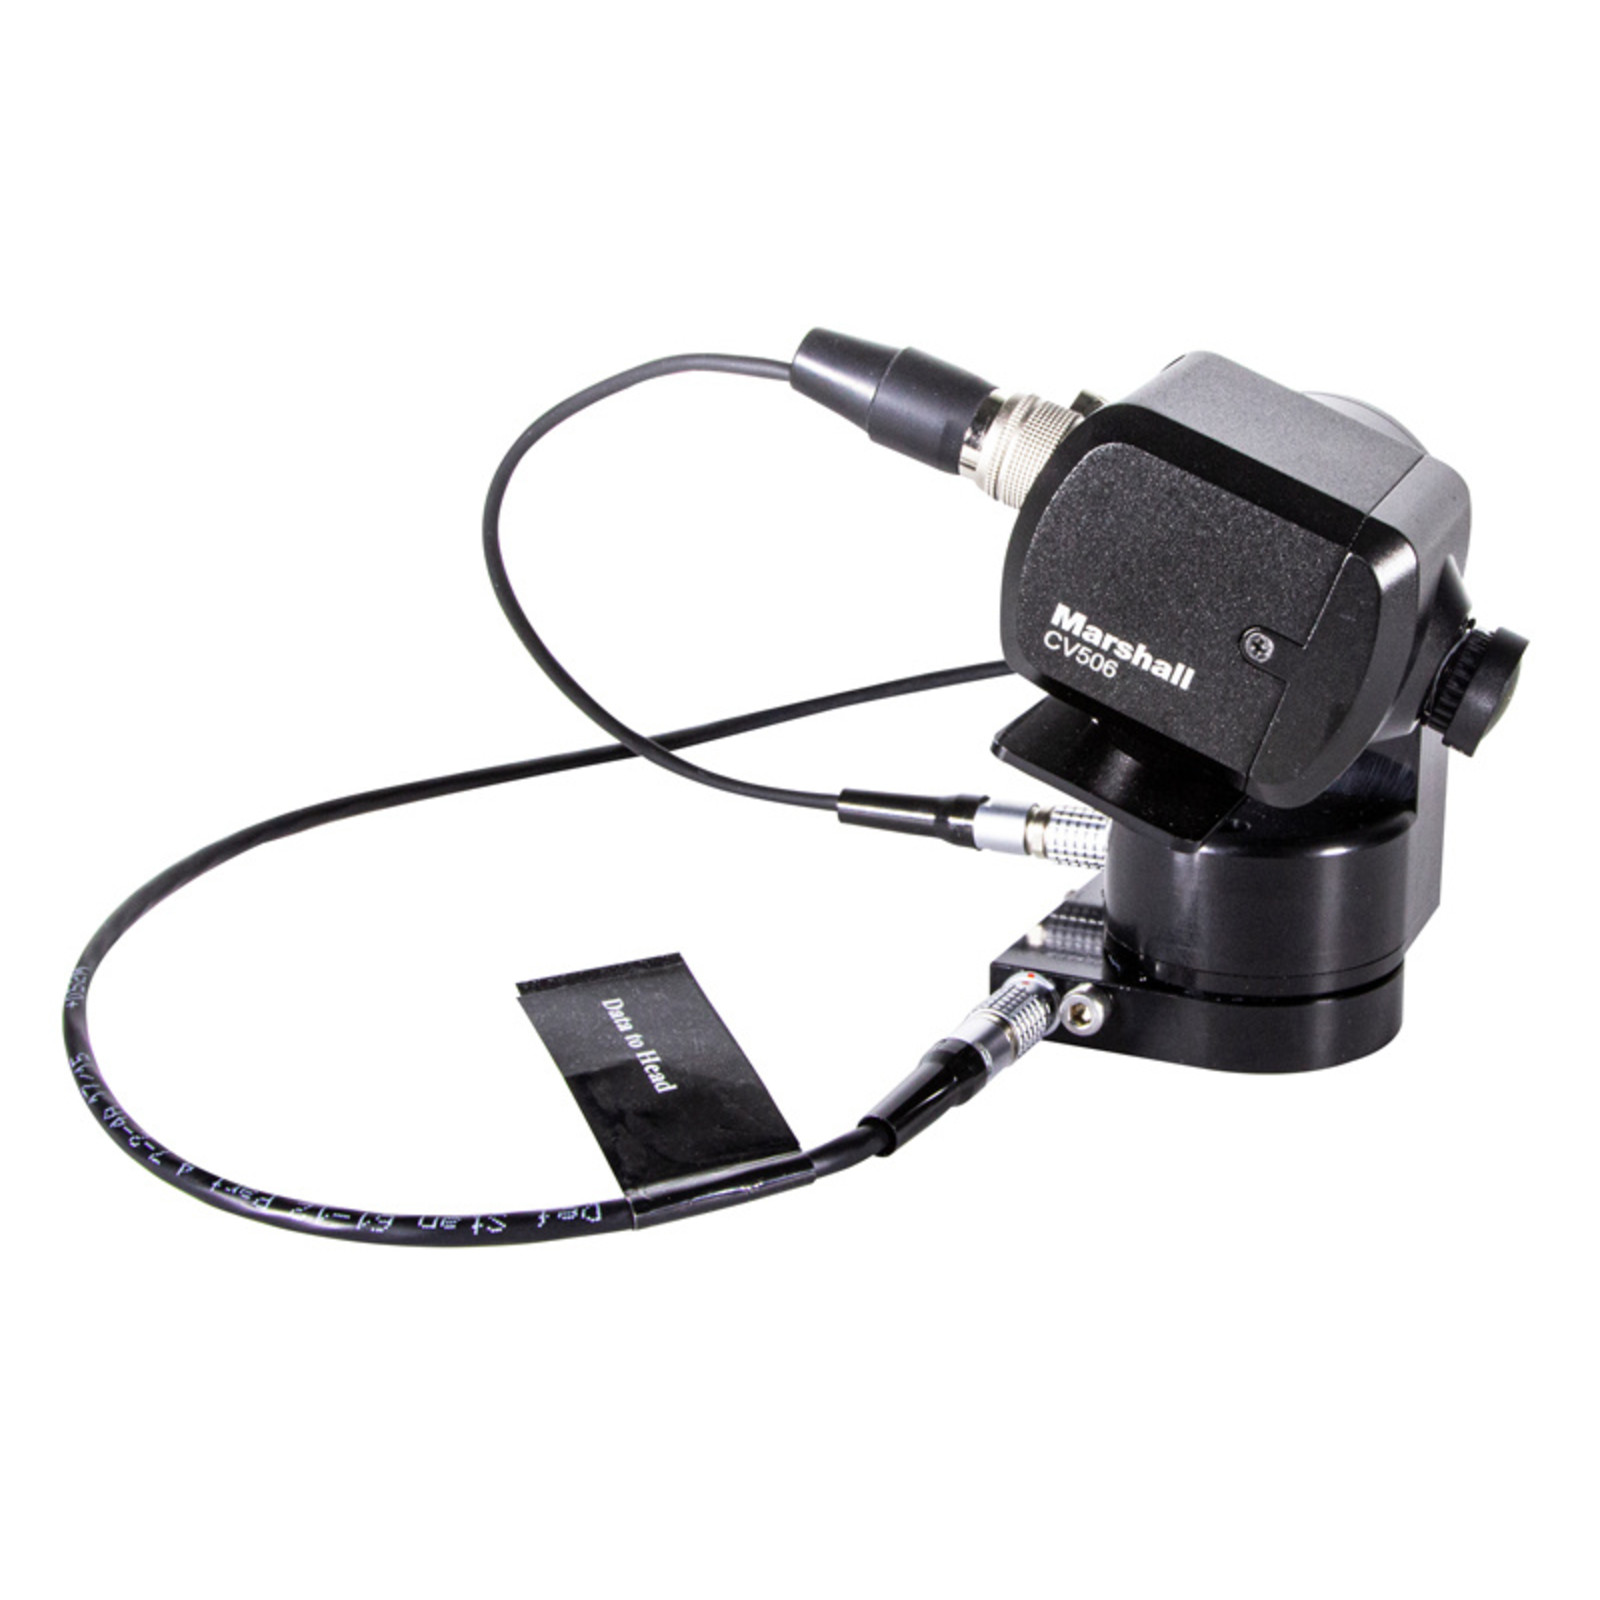 Marshall Micro Remote Pan/Tilt Head for Marshall Miniature Cameras with Camera Link Cable